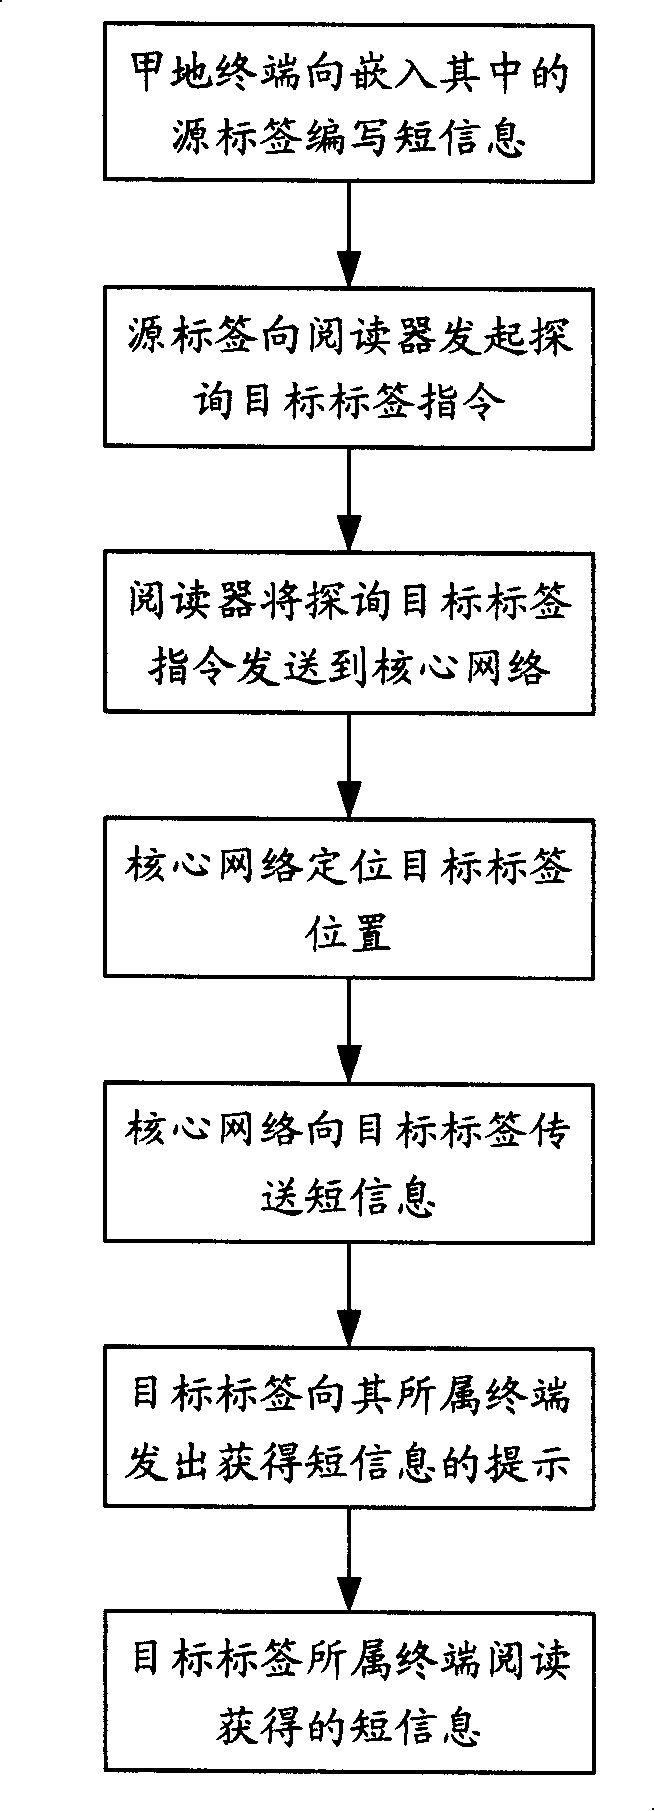 Data exchange system based on radio frequency recognition technology